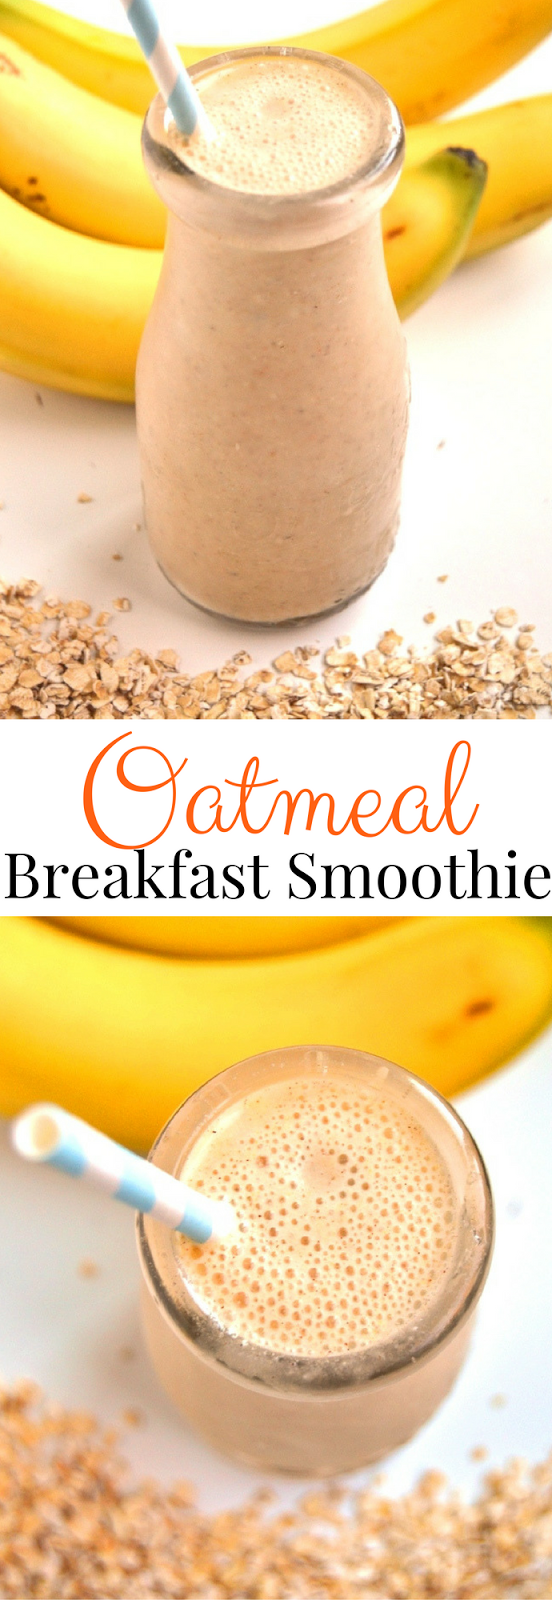 Kids Oatmeal Breakfast Smoothie is a nutritious smoothie for kids with bananas, oats, peanut butter and milk! www.nutritionistreviews.com